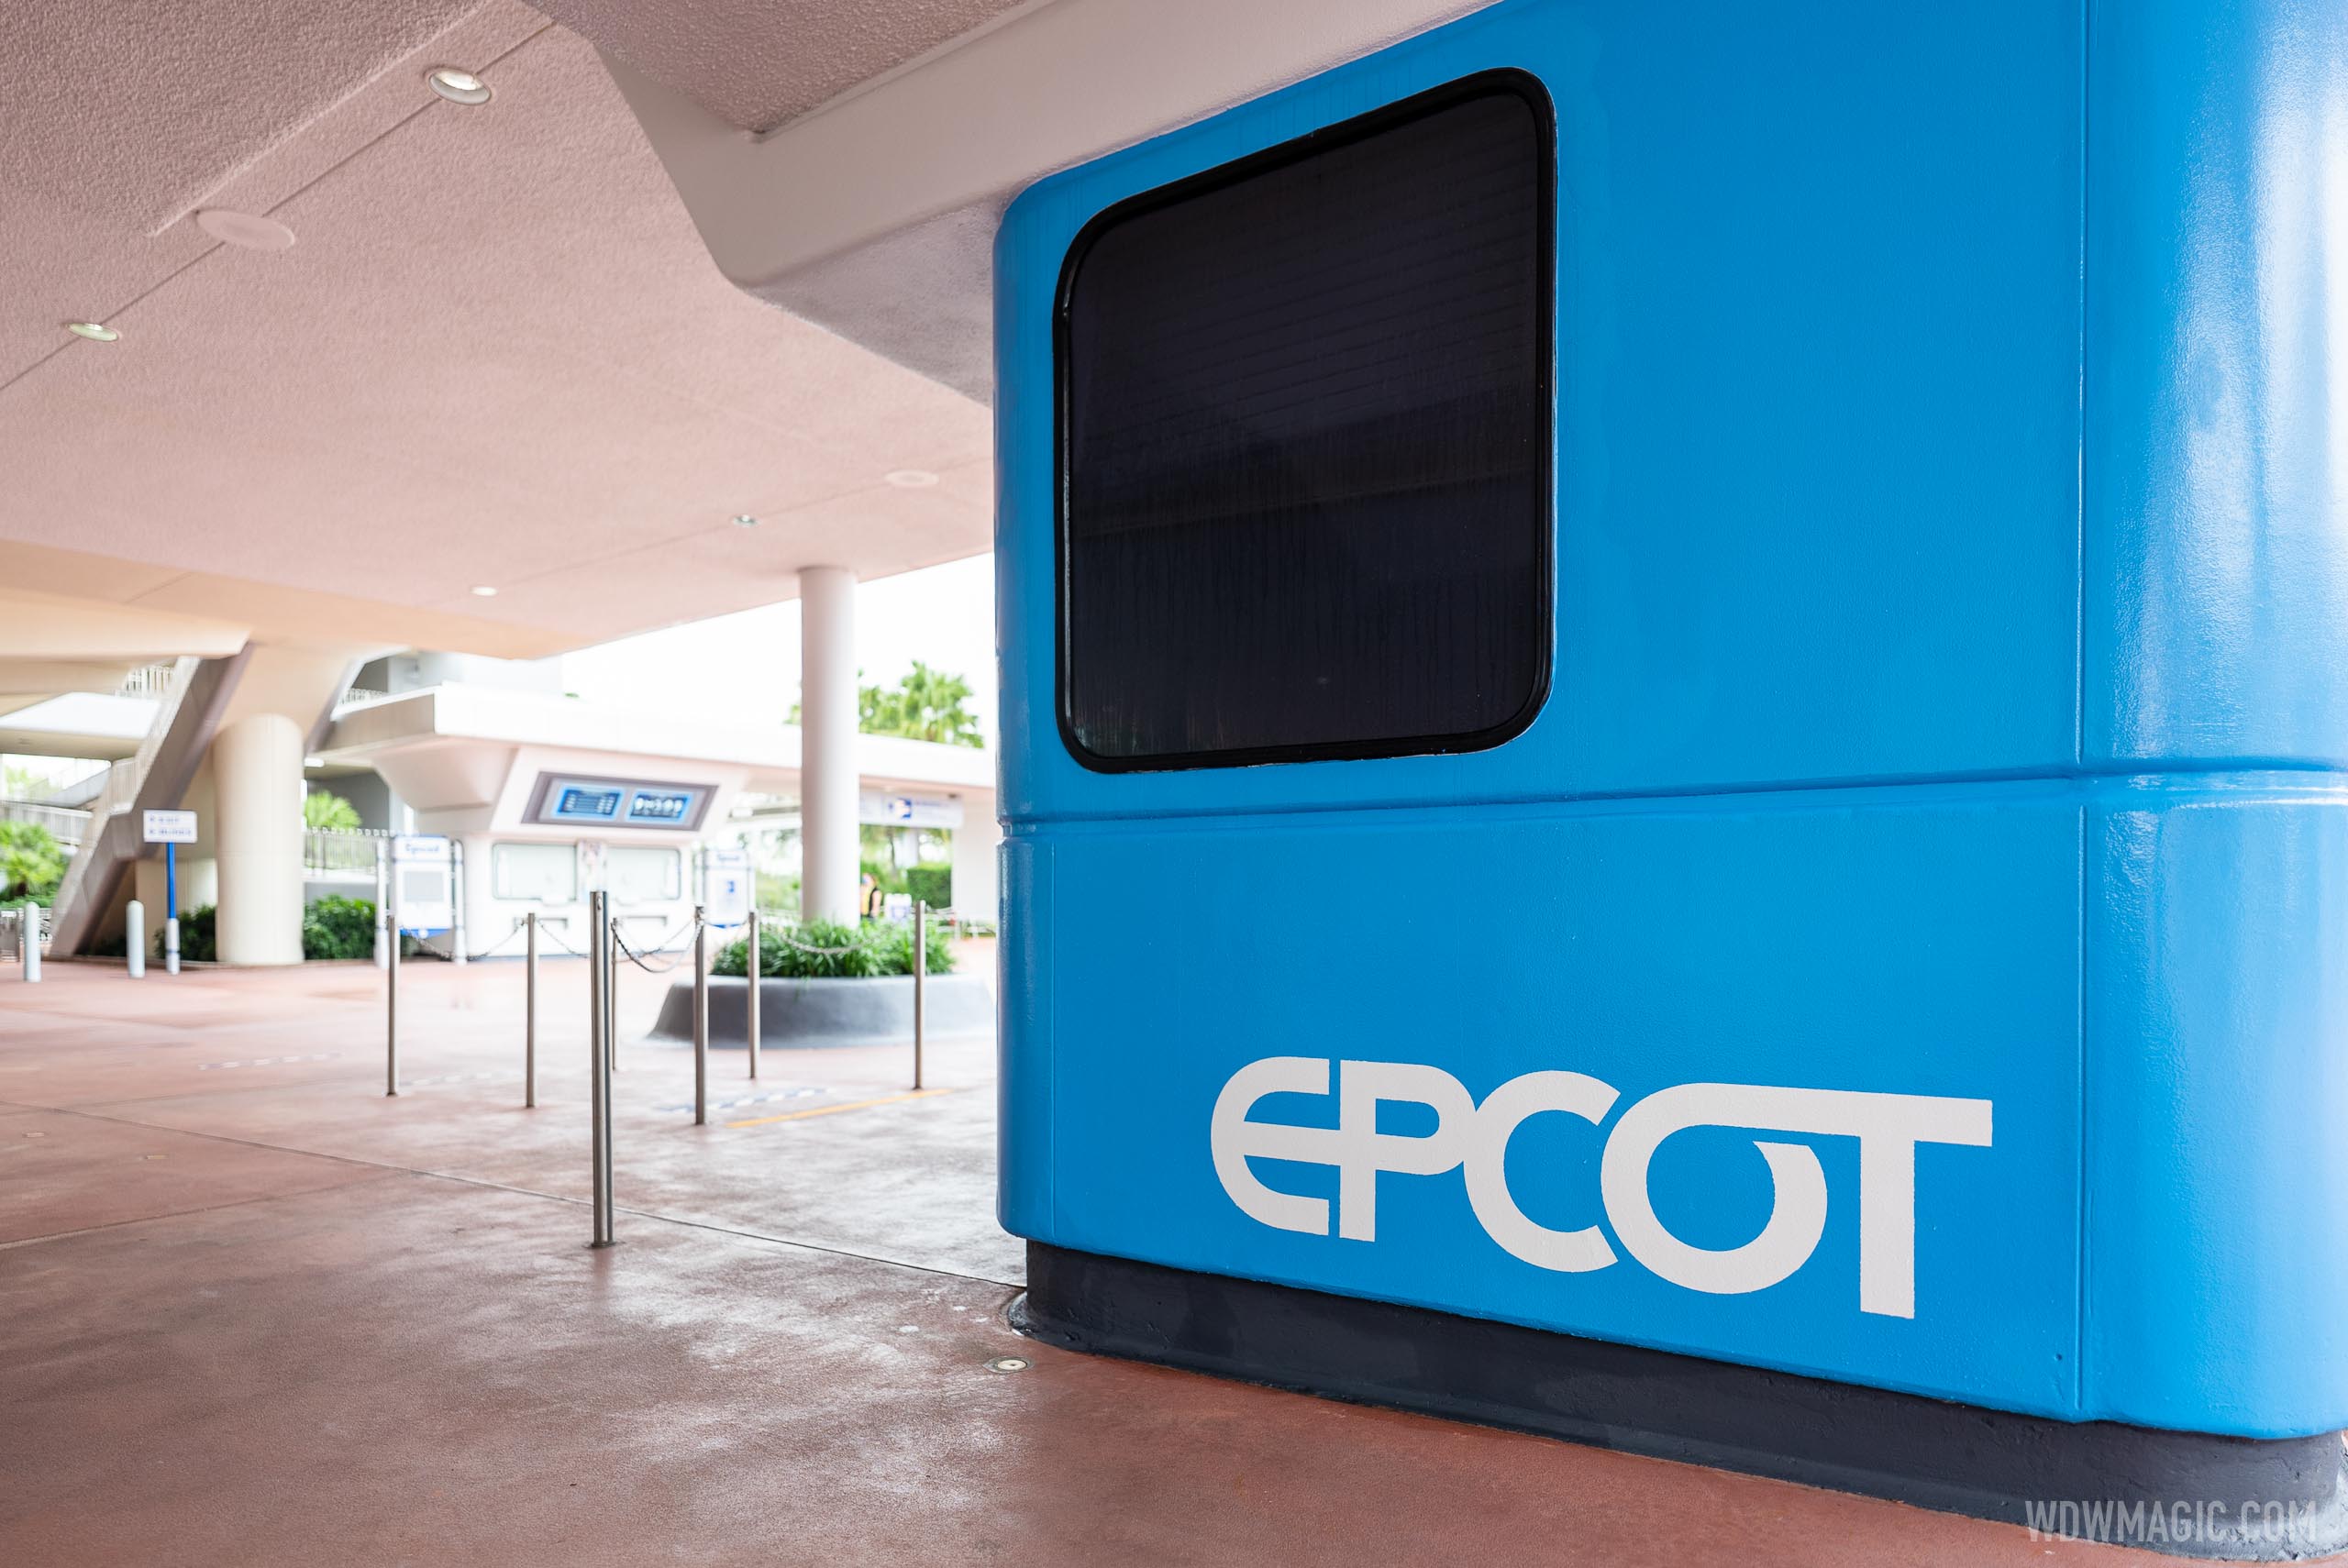 EPCOT logos added to the main entrance ticket booths